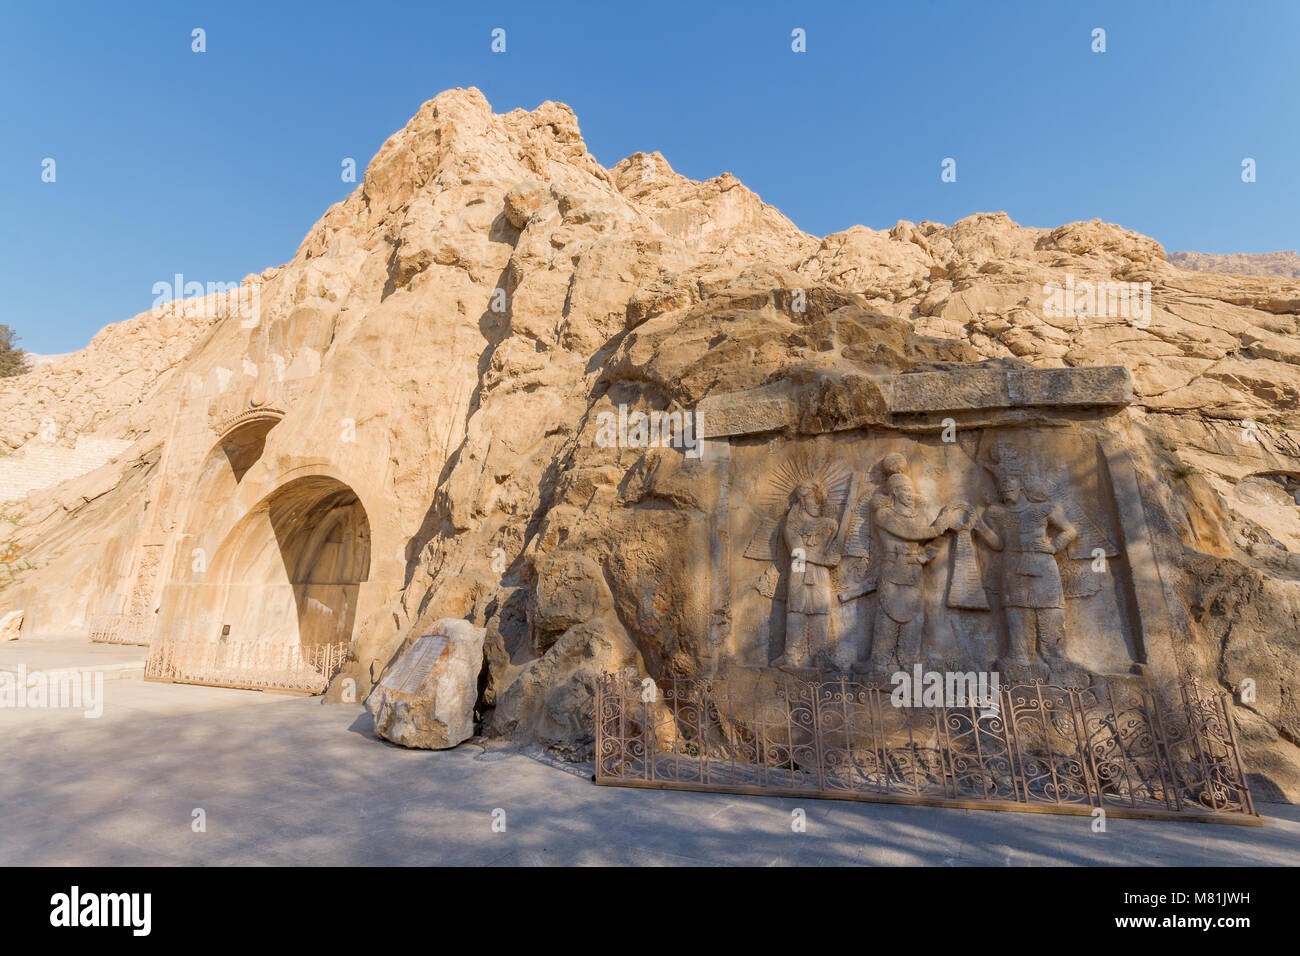 Taq-e Bostan. Kermanshah. Carved into rock, place with a several reliefs from era of Sassanid Empire of Persia. Winter season, shortly after sunrise. Stock Photo